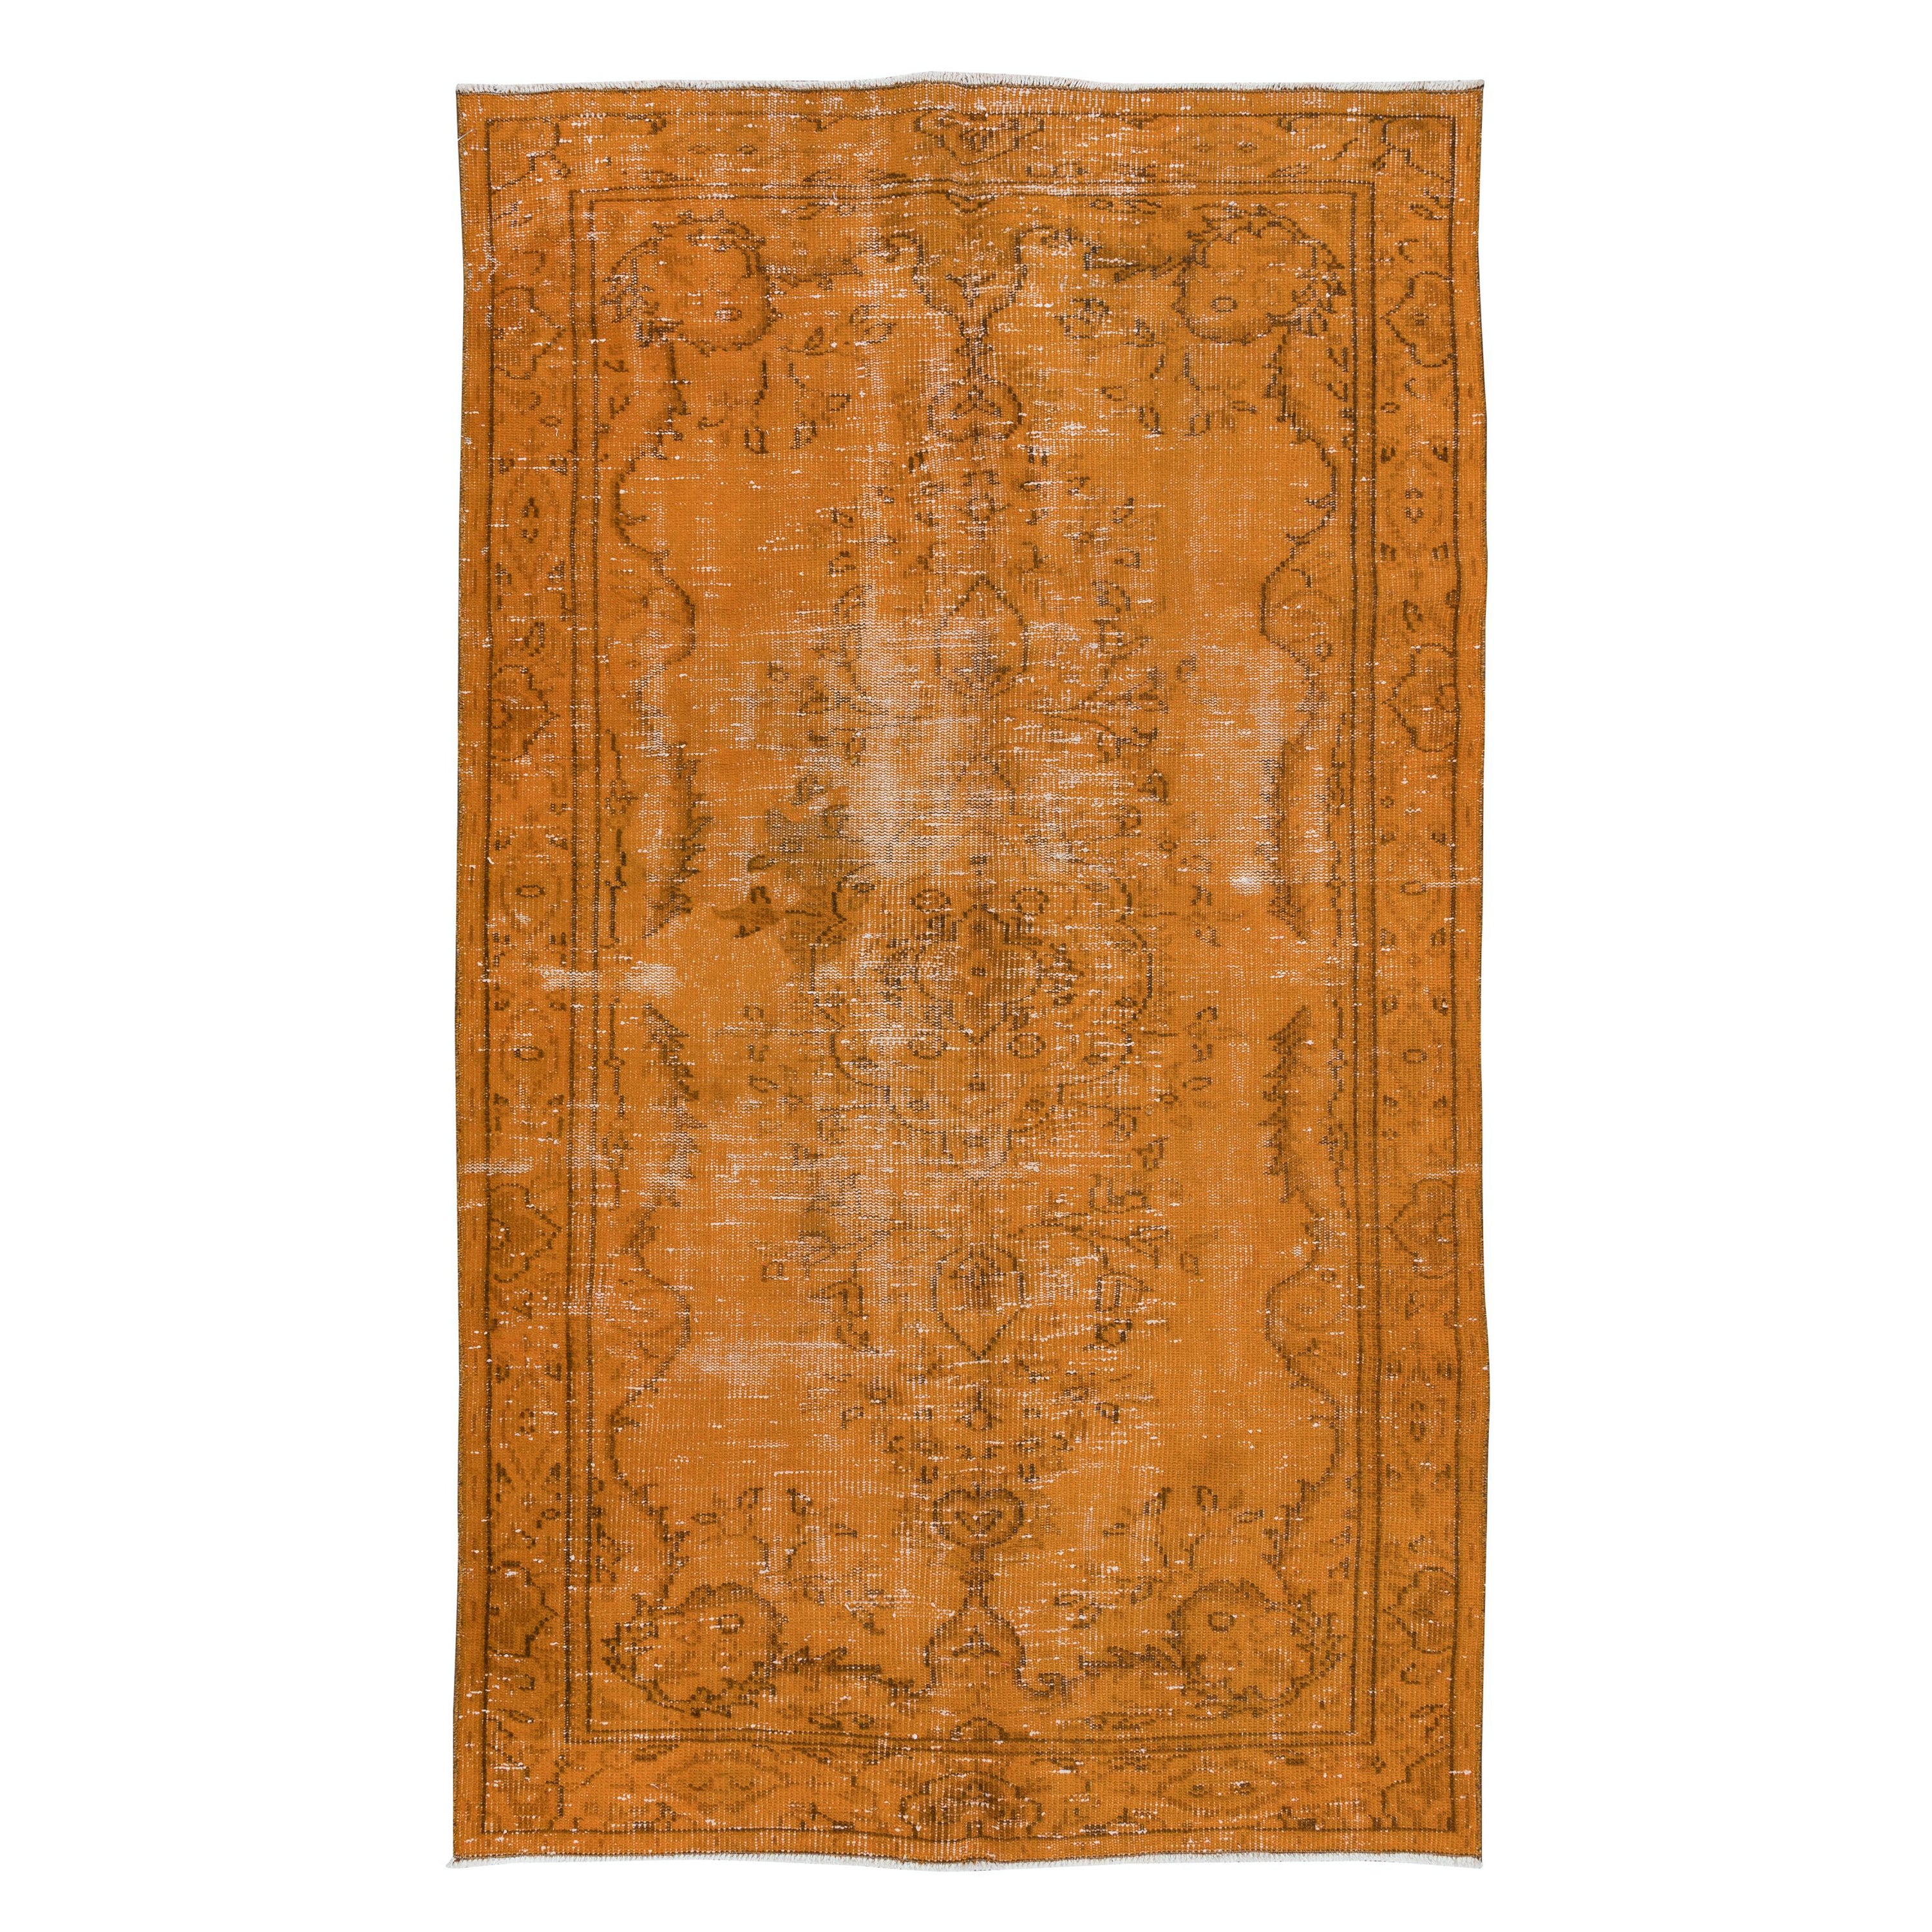 4.5x7.7 Ft Vintage Orange Area Rug, Handwoven and Handknotted in Turkey